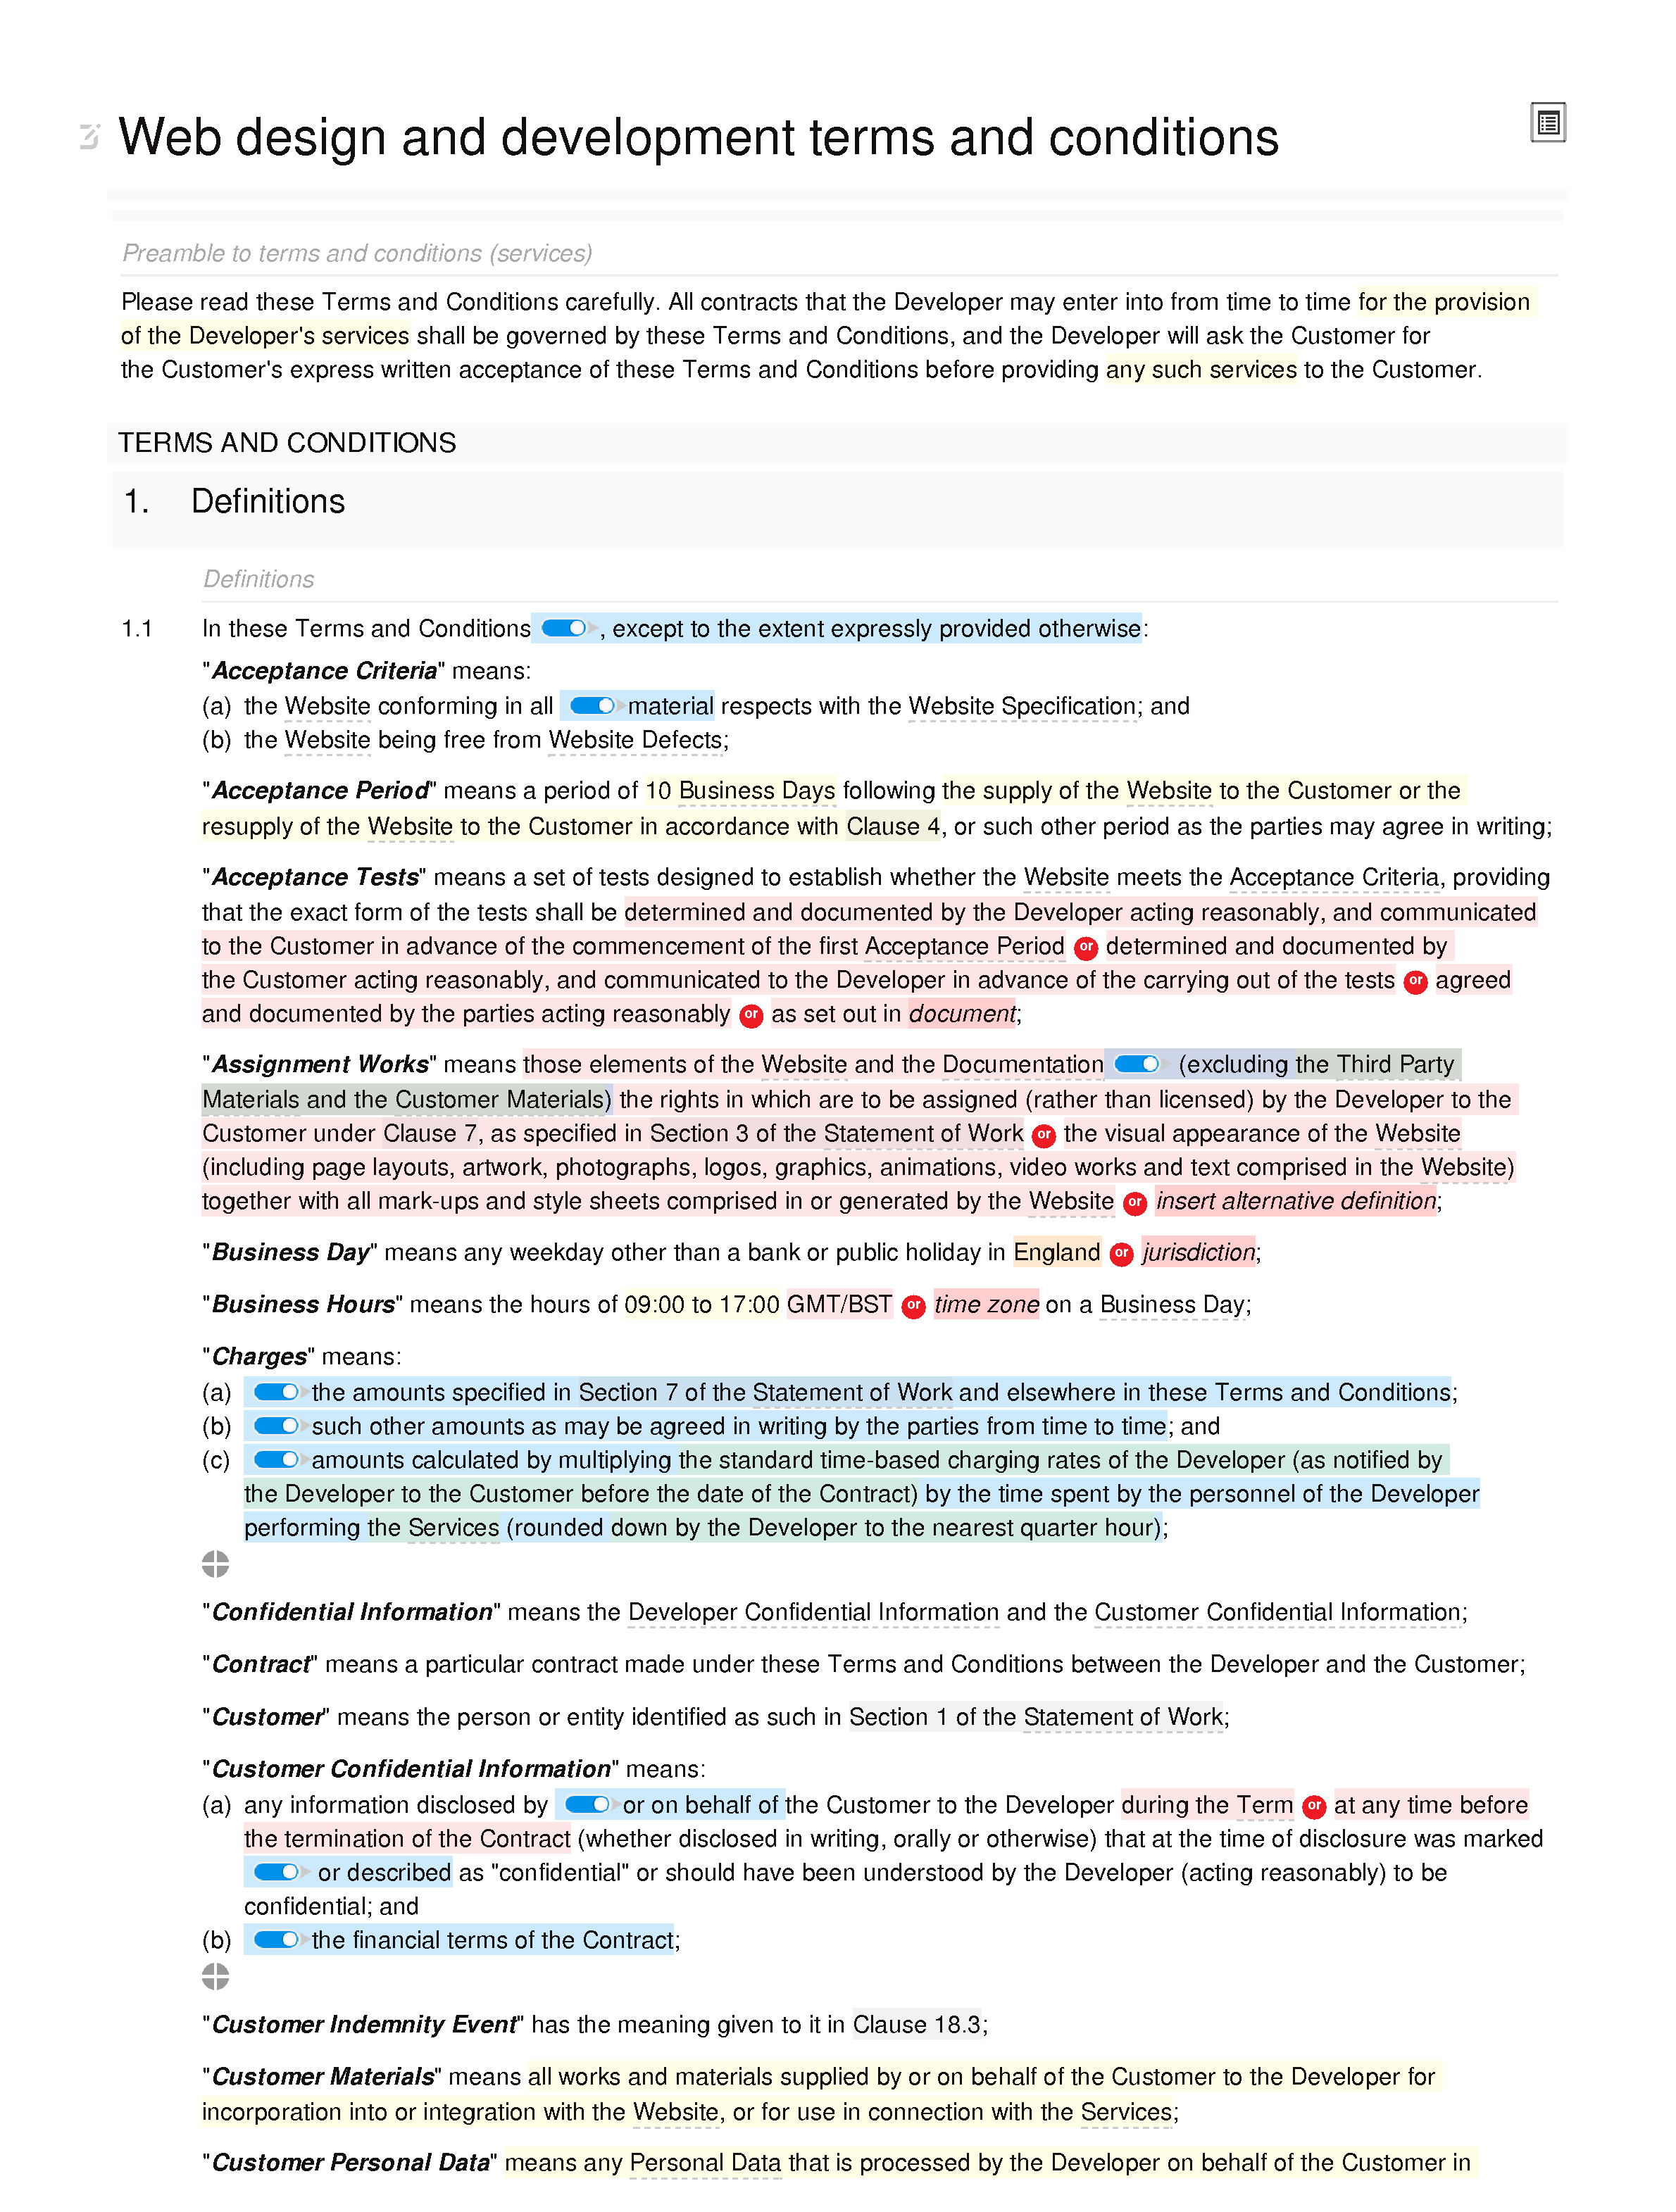 Web design and development terms and conditions (standard) document editor preview